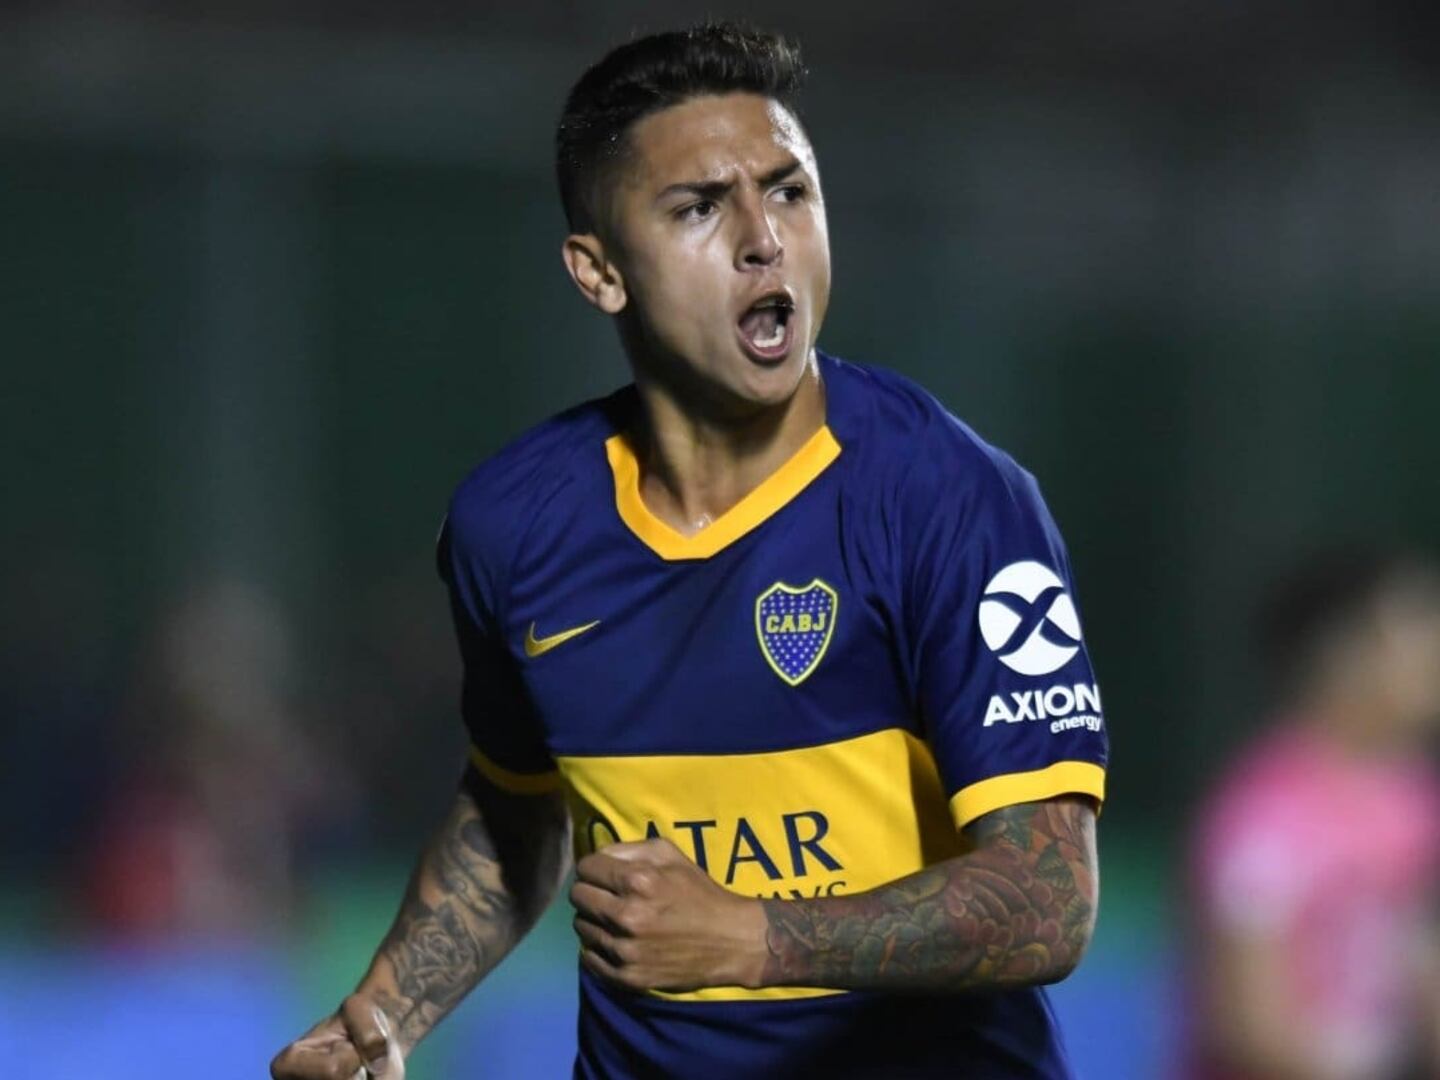 Who is the Boca Juniors star that wants to play in MLS?